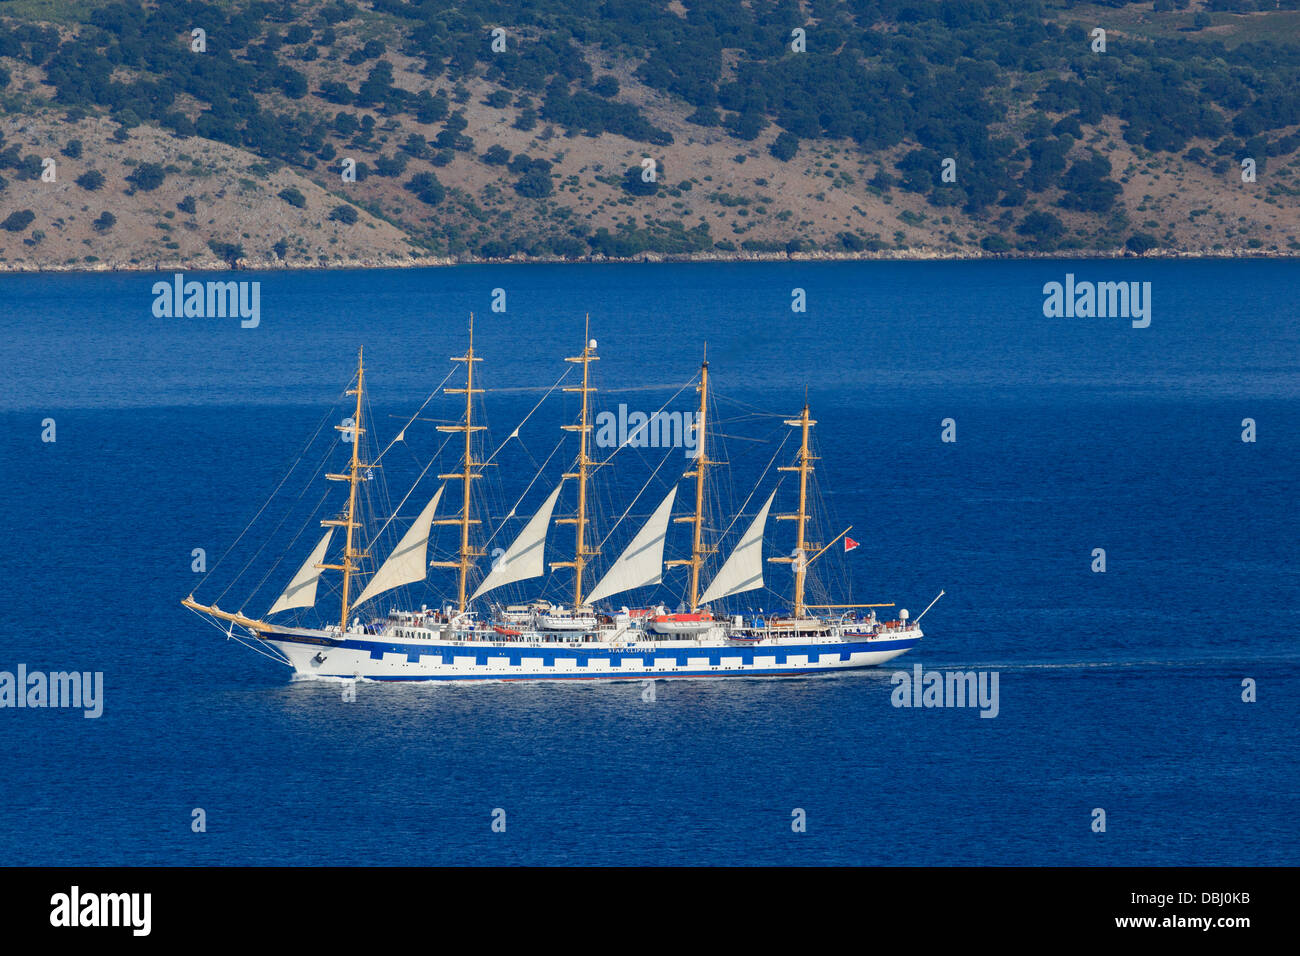 The Royal Clipper a sailing cruise ship passing through the straits between Corfu and Albania Stock Photo